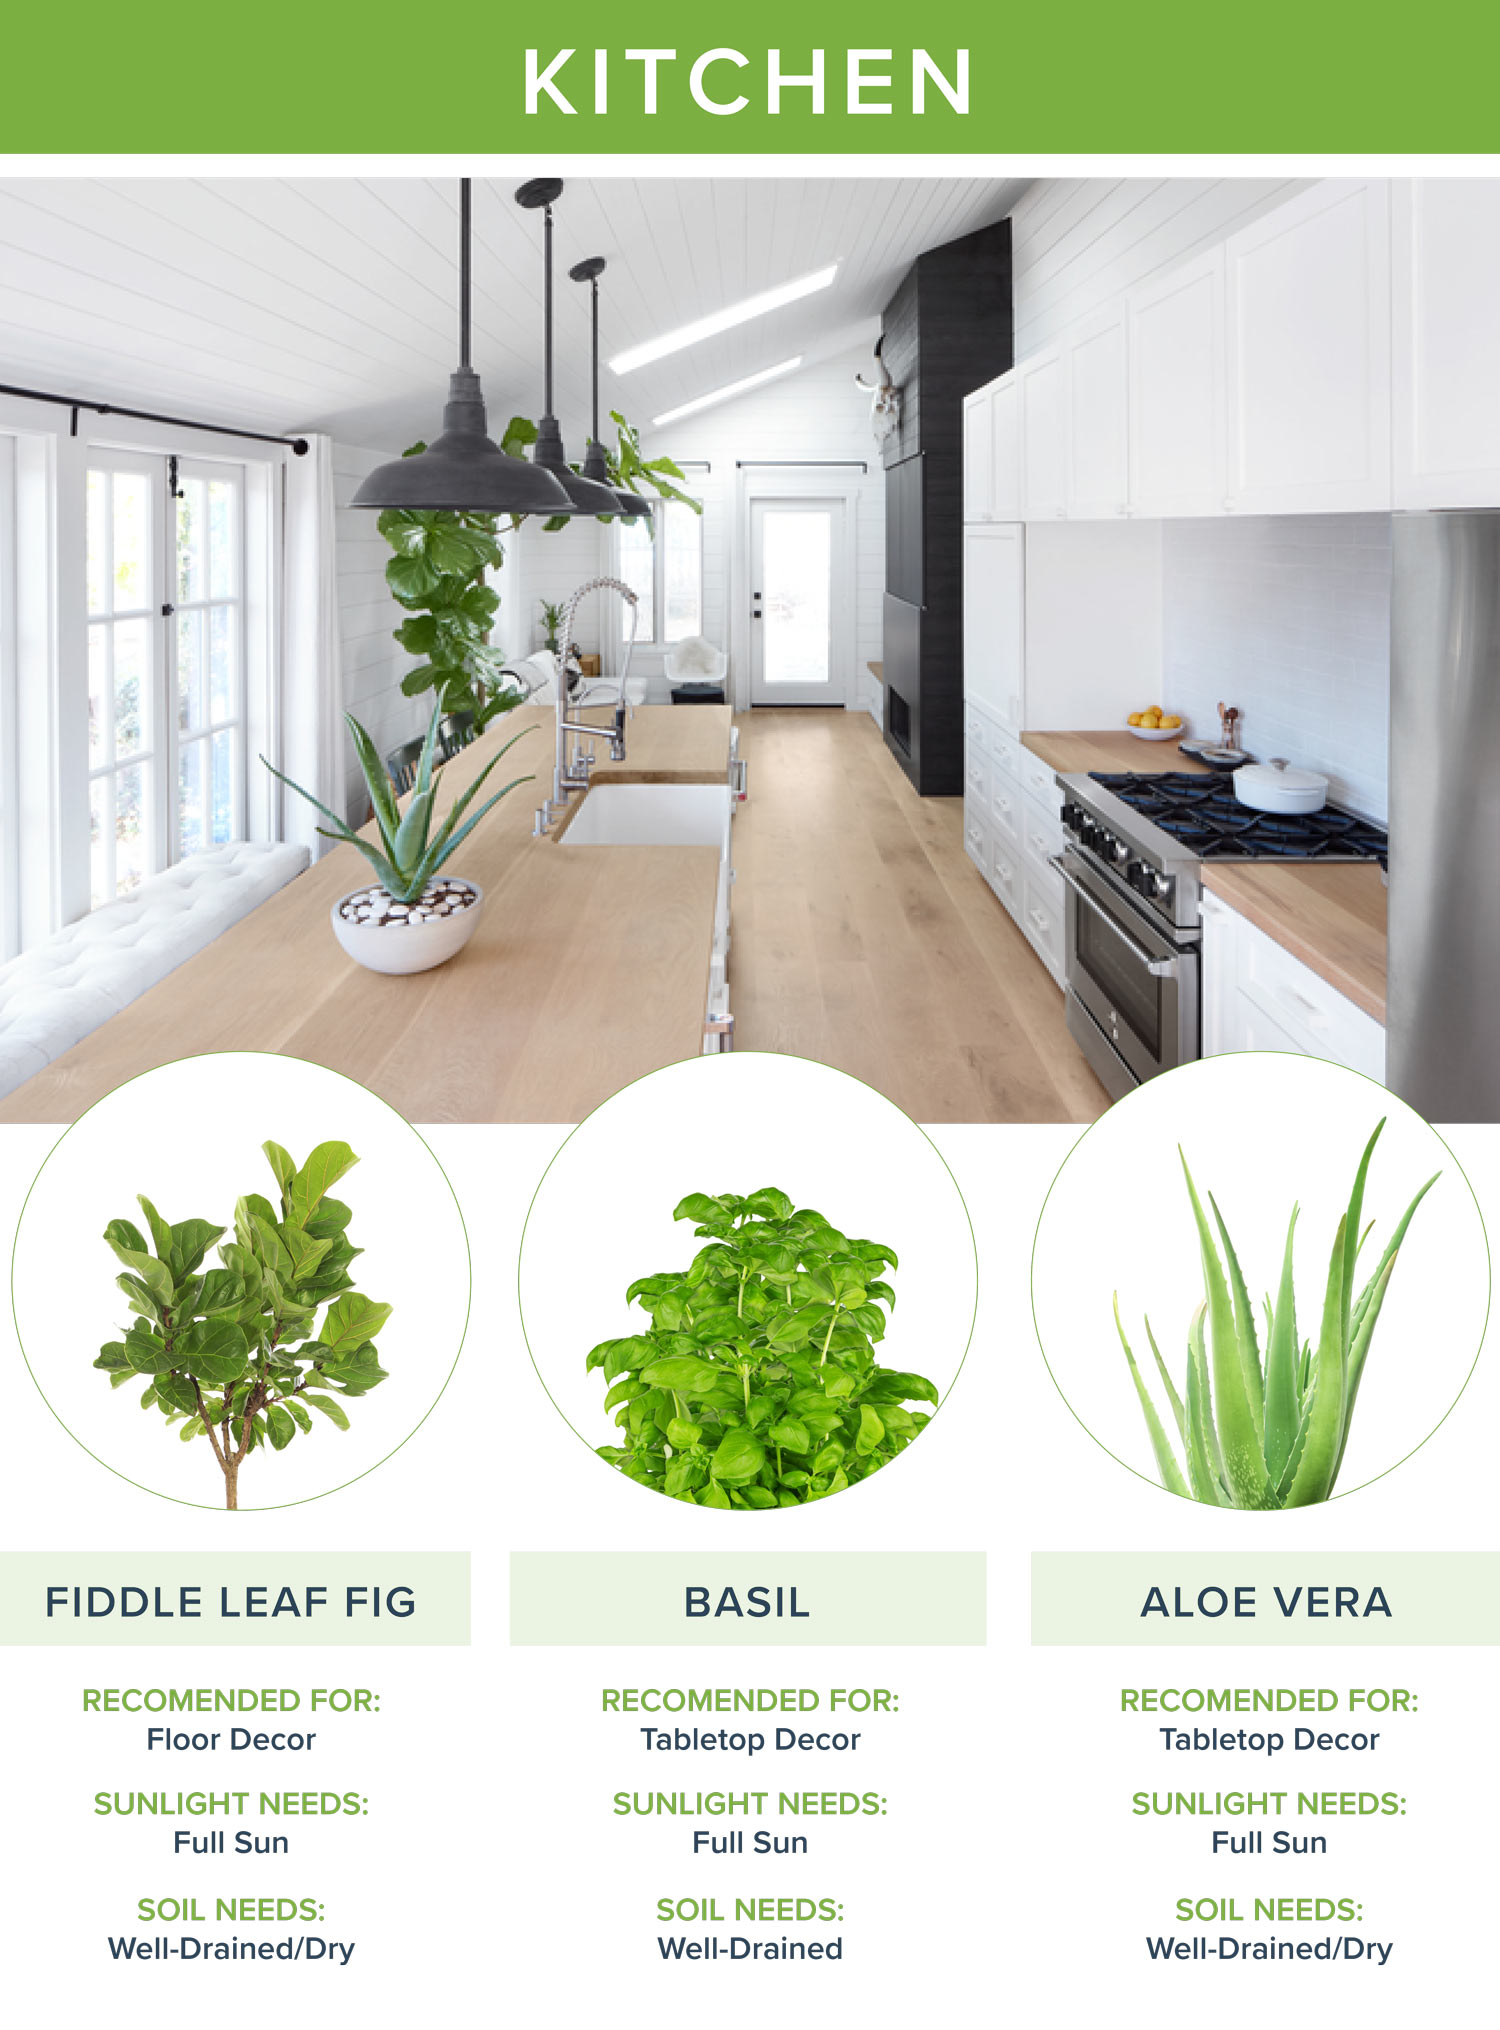 Purify the Air with Air-Purifying Plants